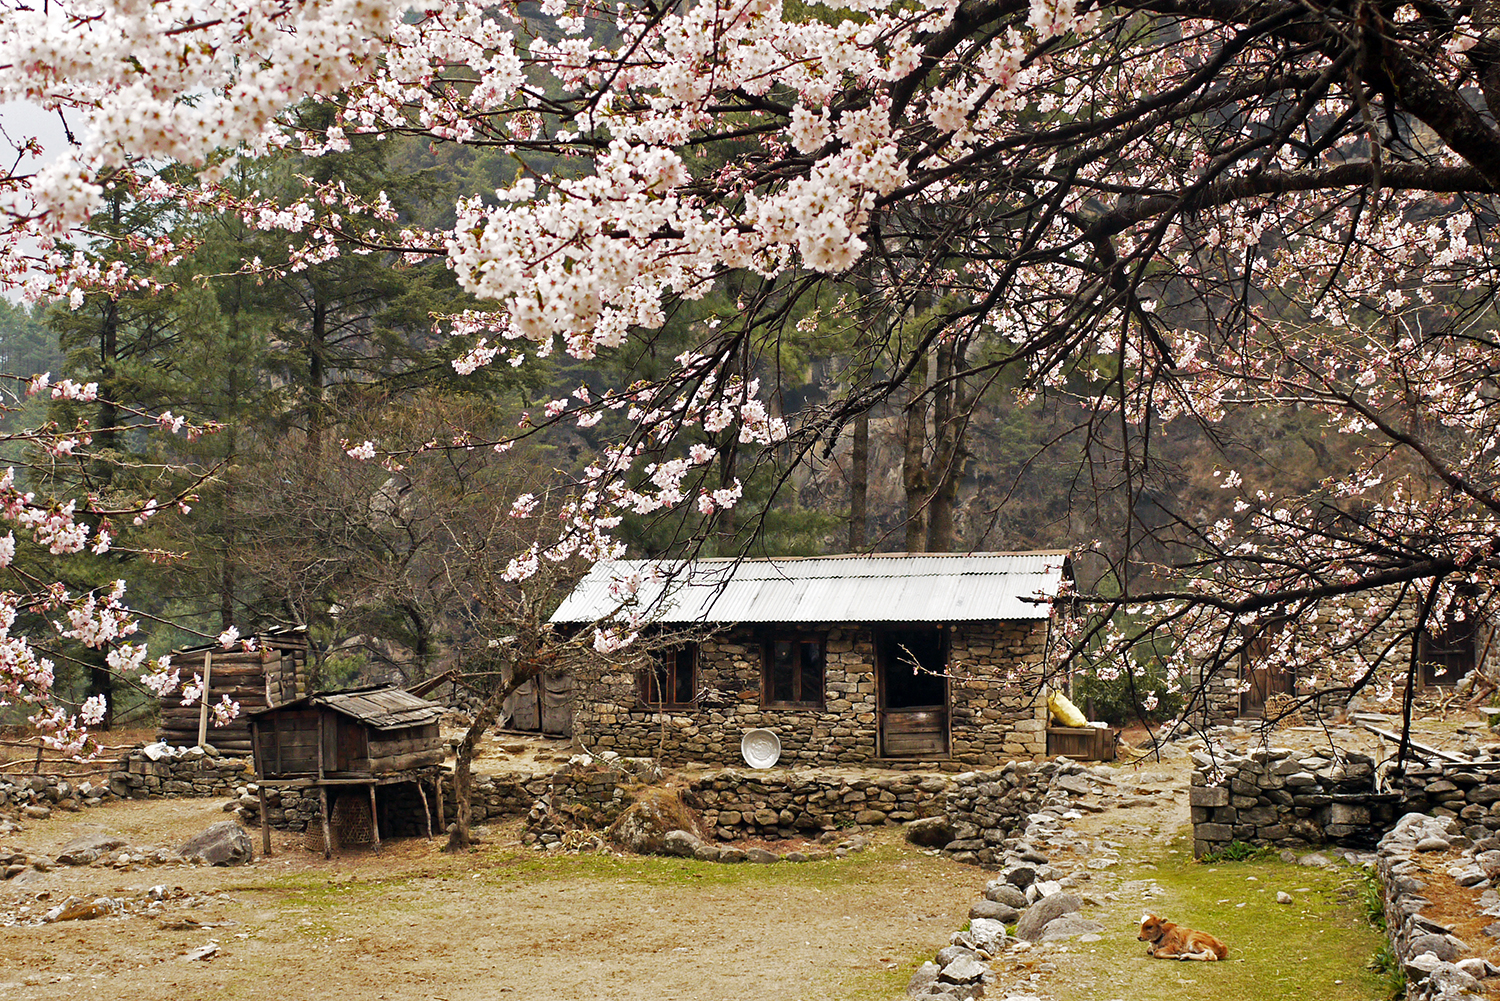 Cherry blossoms frame a simple house on the walk from Lukla to Jiri